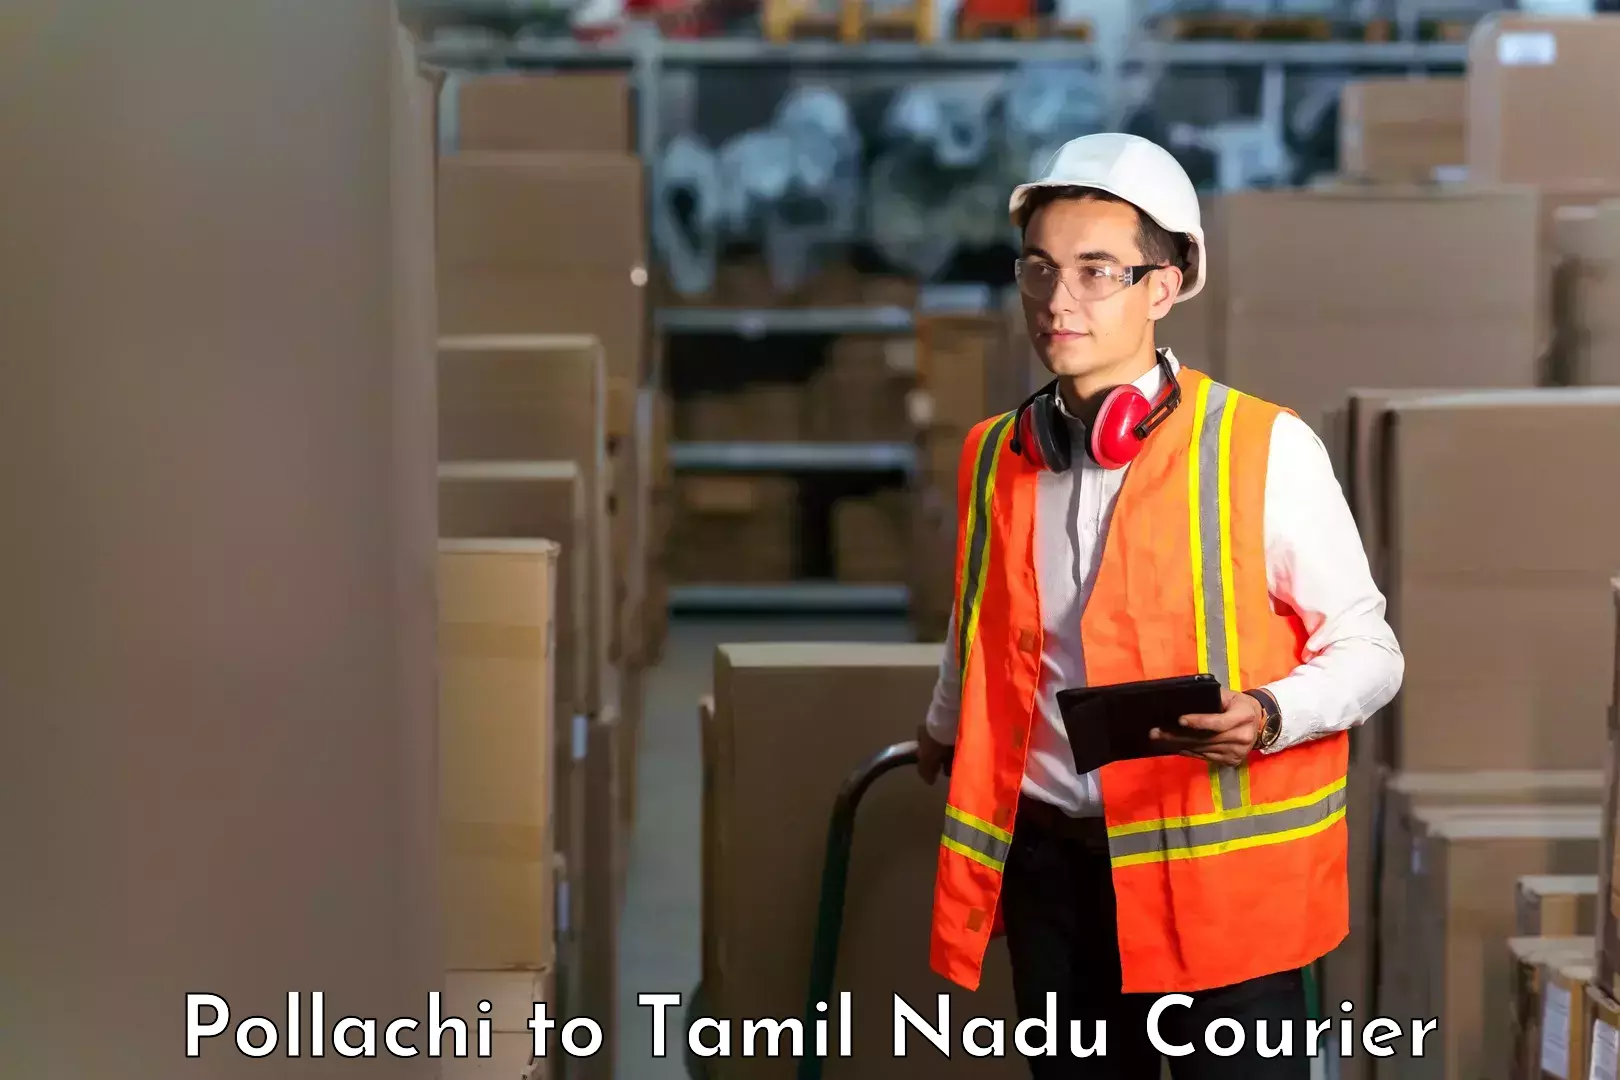 Customizable delivery plans Pollachi to Nagercoil